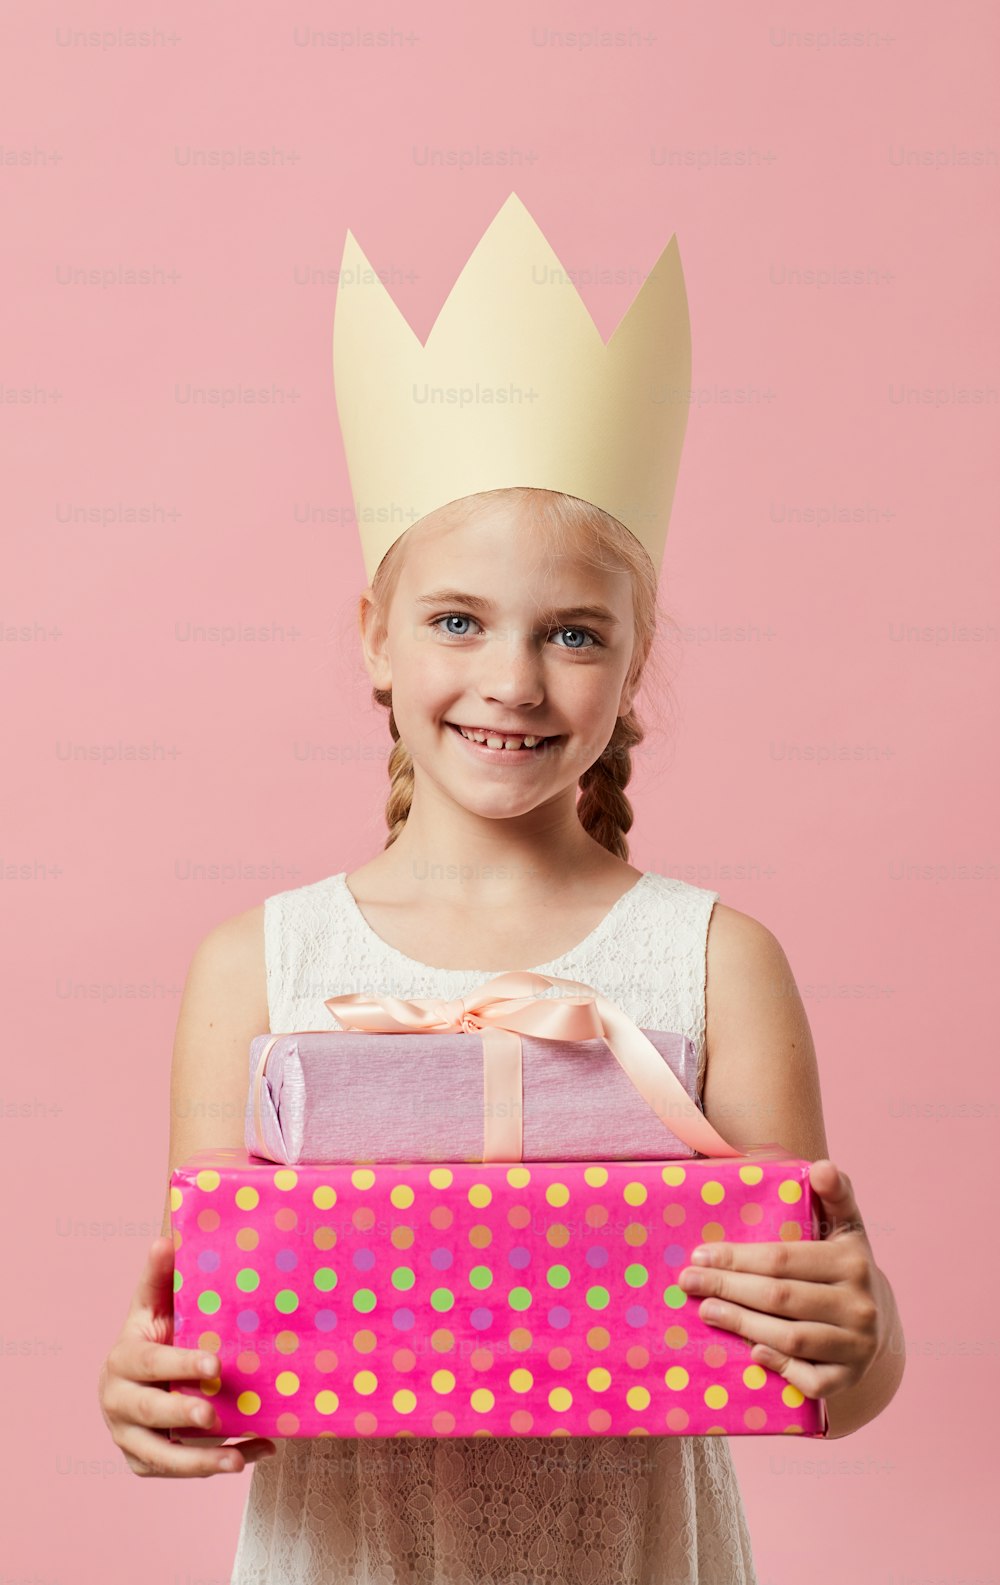 Waist up portrait of cute little  girl wearing crown posing against pink background, Birthday party concept